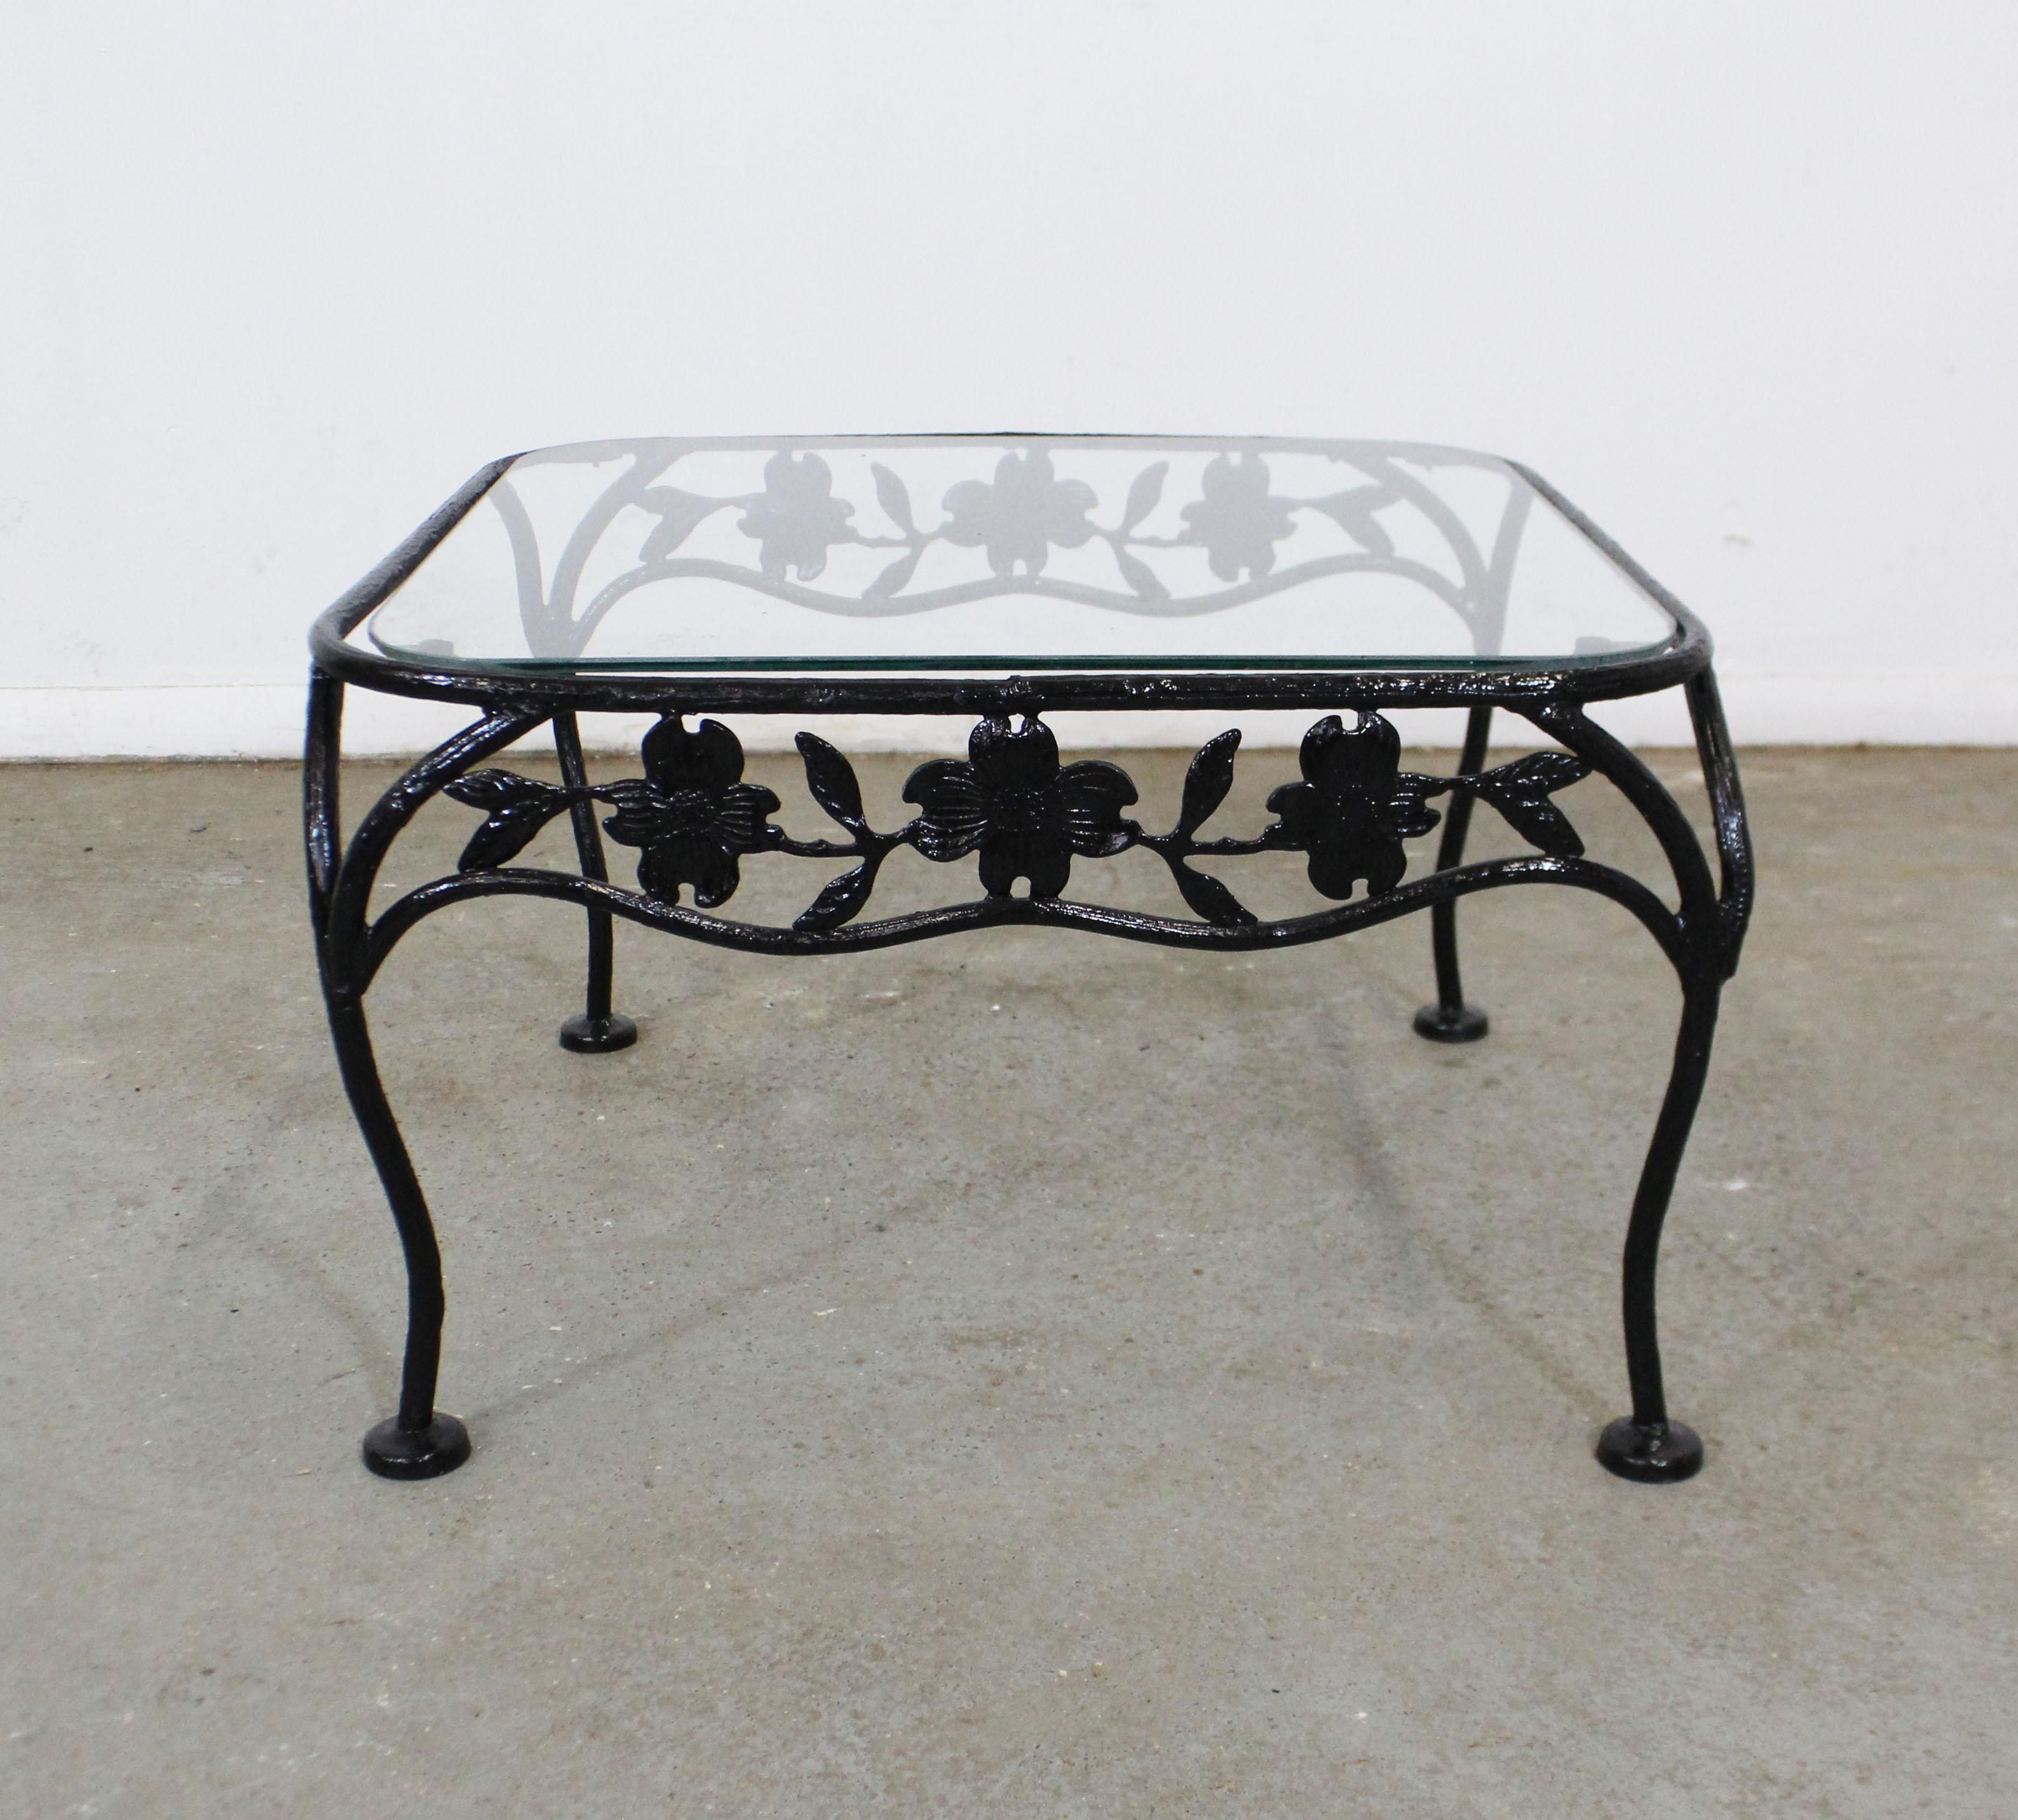 What a find. Offered is a vintage wrought iron dining table with a dogwood-leaf design and a removable glass top. Perfect for an outdoor patio space! Attributed to Meadowcraft's 'Dogwood' line. It is in good condition with a repainted and